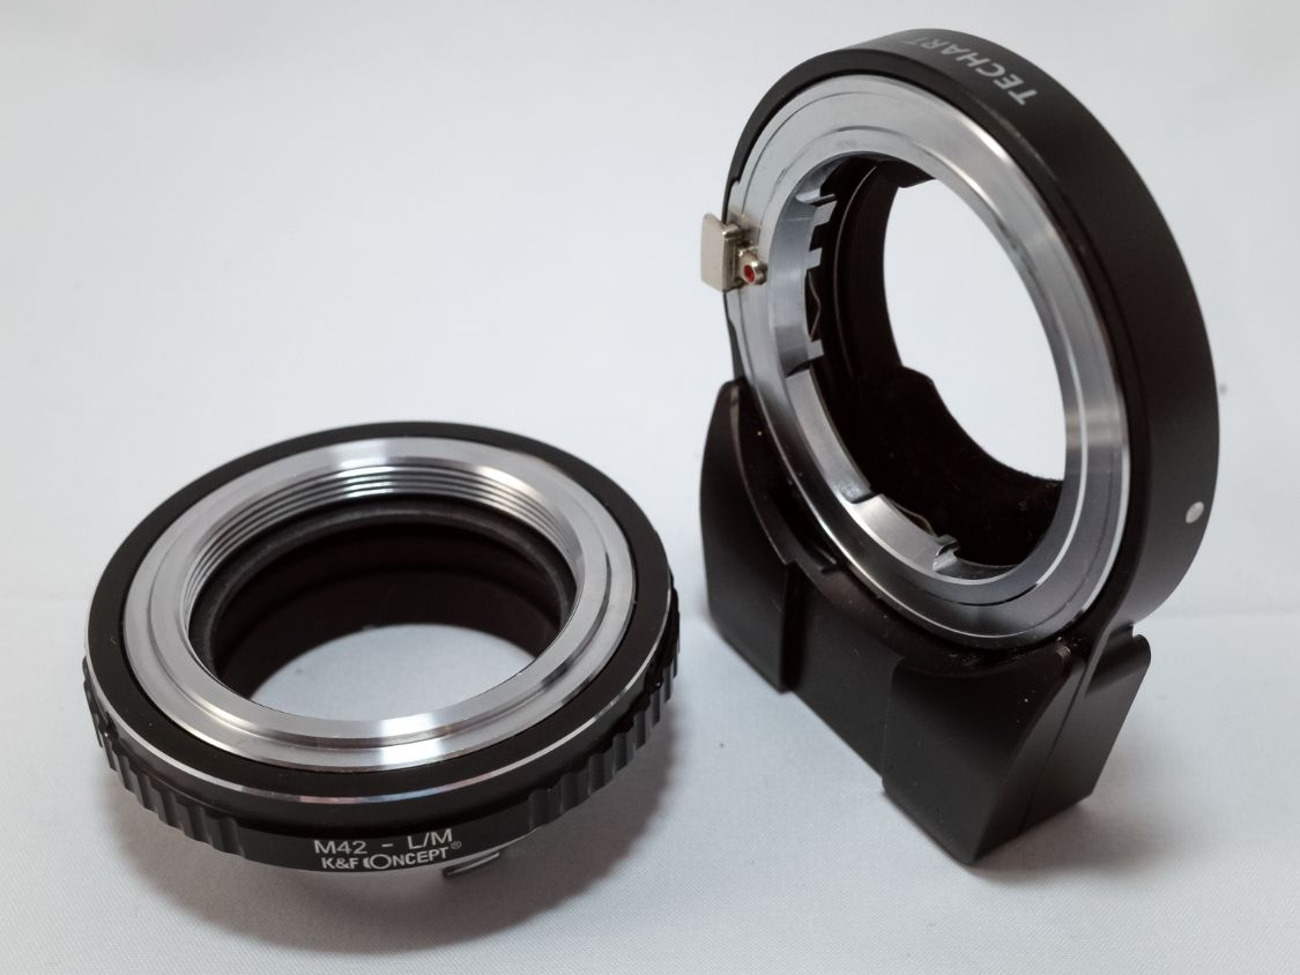 Rent TECHART LM-EA7 Auto Focus Lens Adapter + M42 Adapter from David A